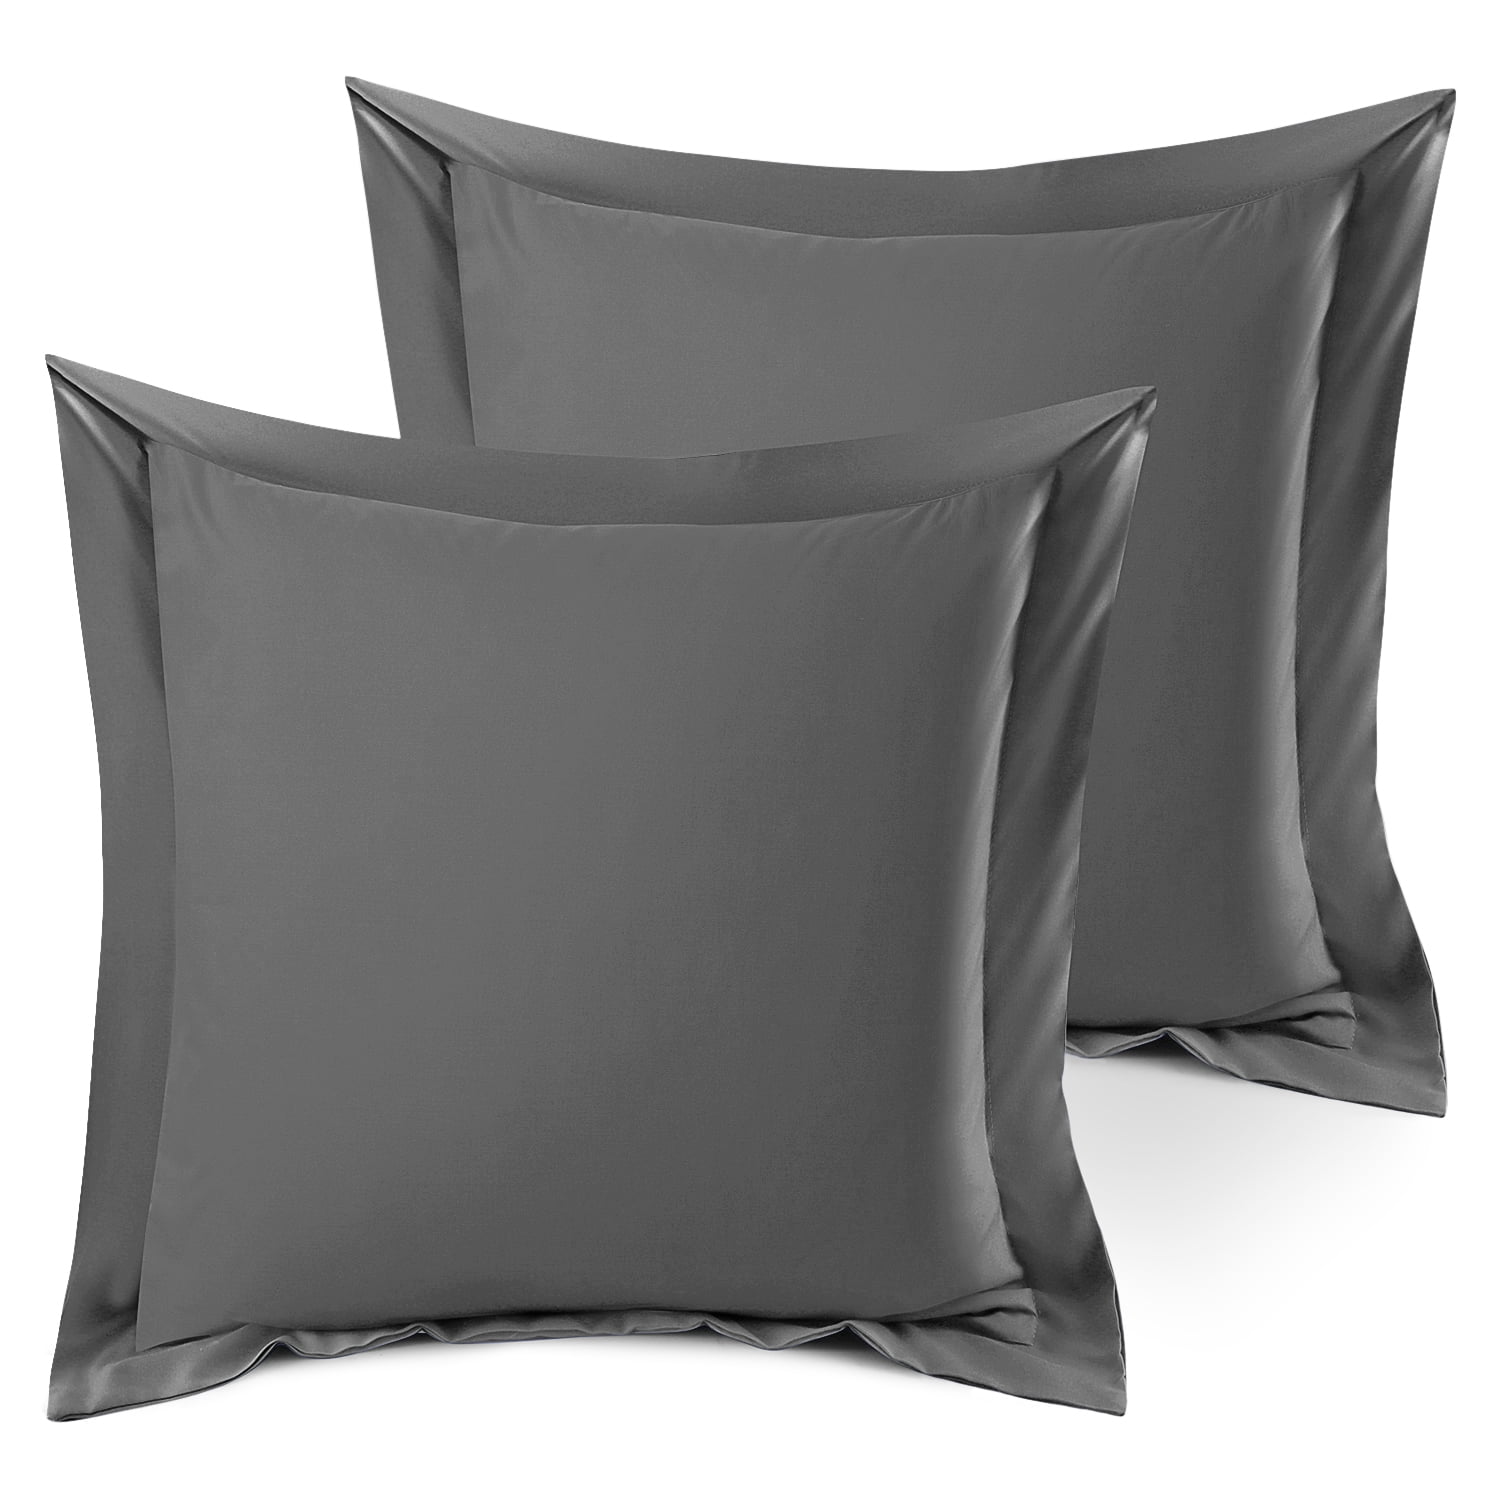 Nestl Set of 2 Euro 18"x18" Size Pillow Shams Charcoal Gray, Hotel Luxury Soft Double Brushed Microfiber, Hypoallergenic, Bed Pillow Cases Cover